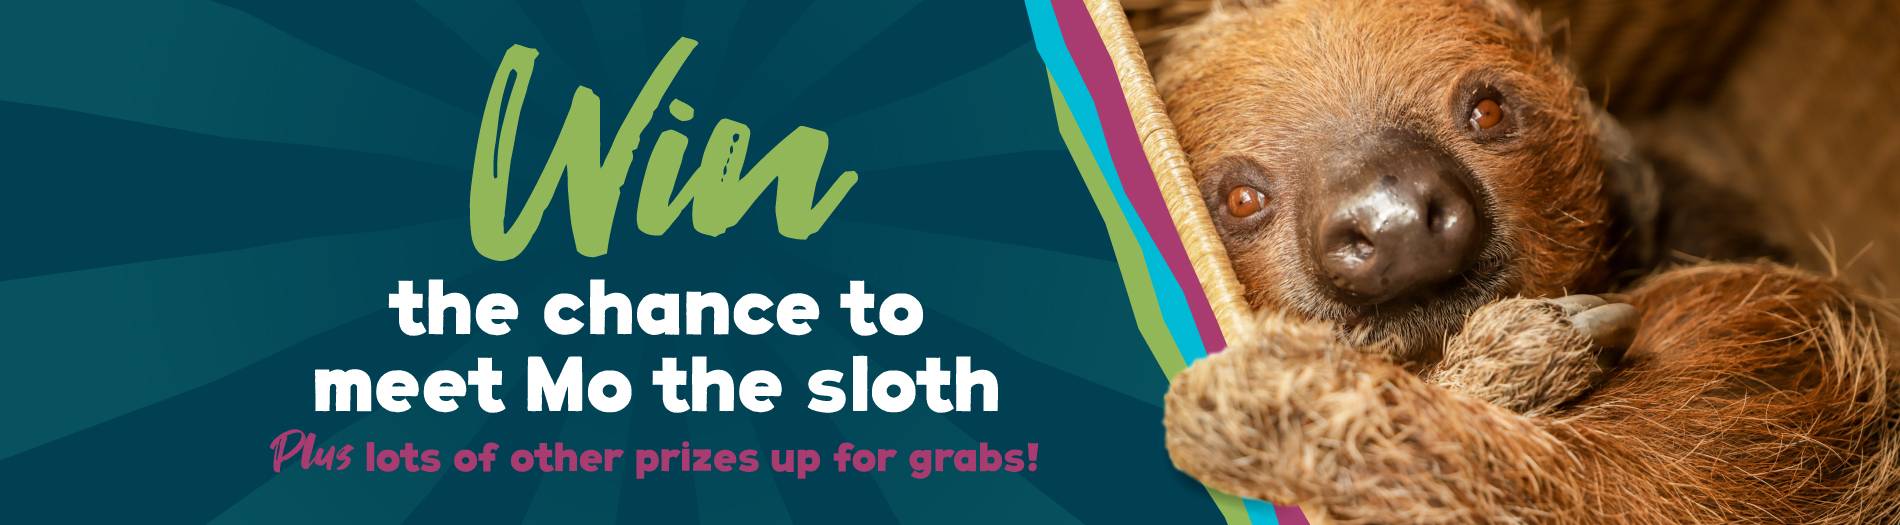 pz crowdfunder mo the sloth web banner